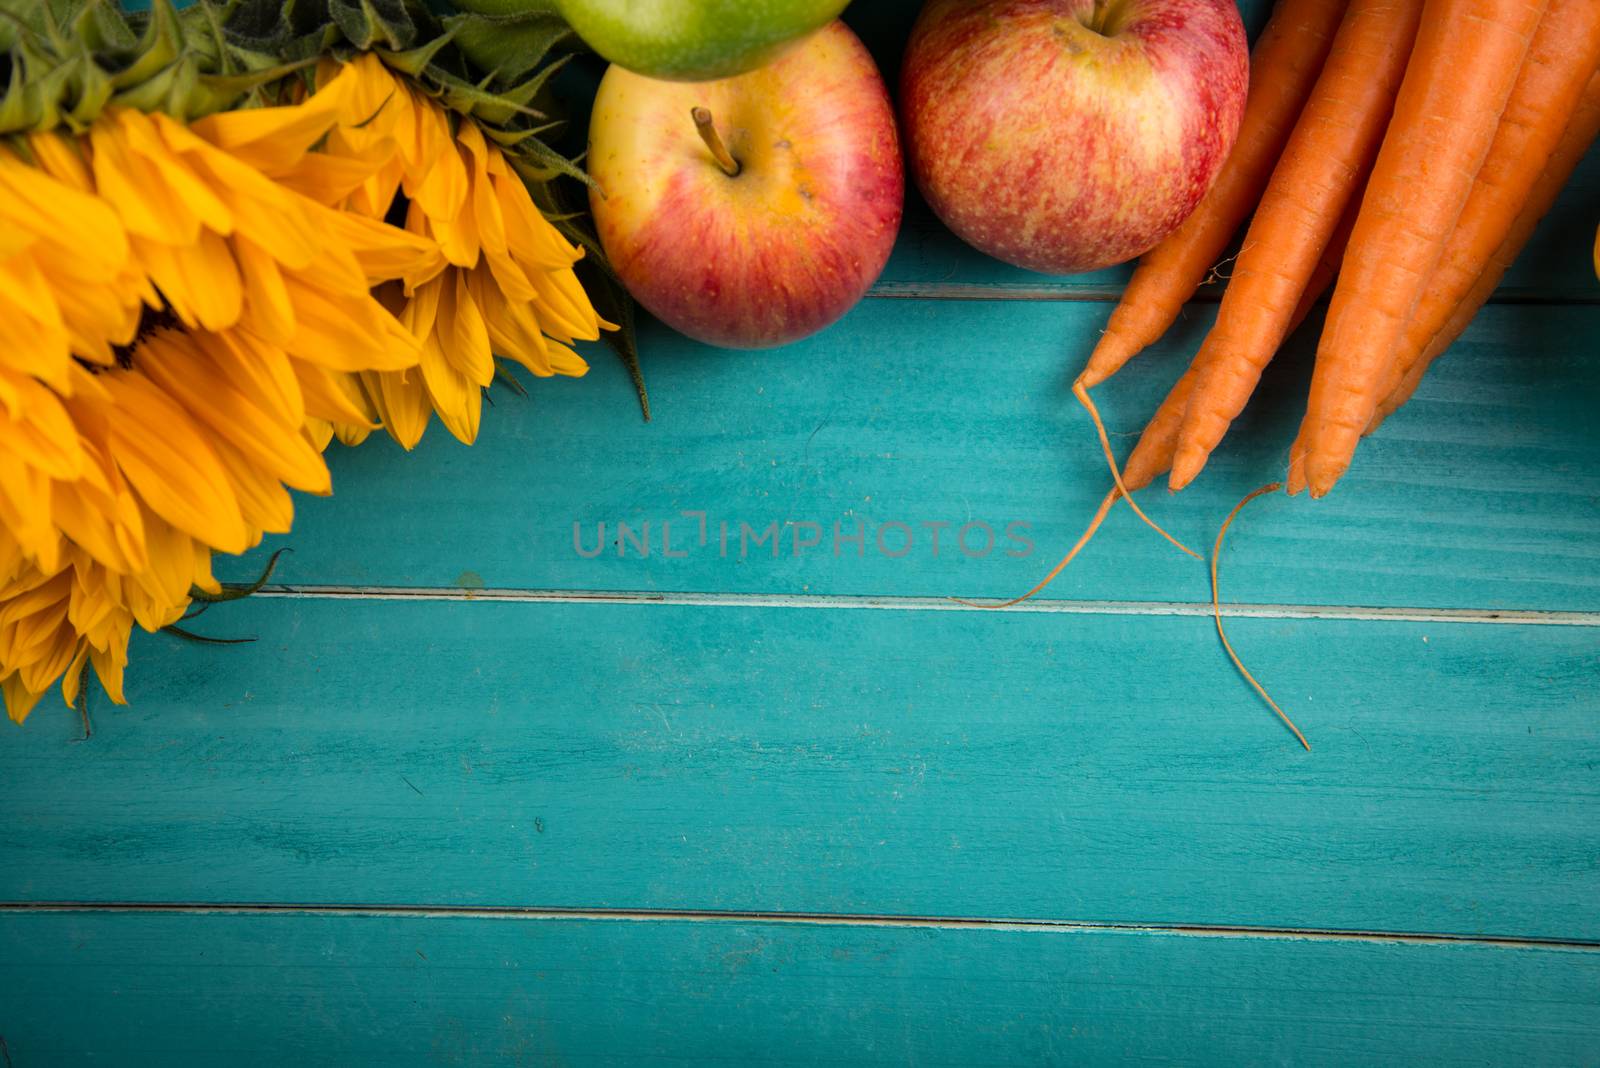 Farm fresh organic vegetables on rustic wooden blue table background